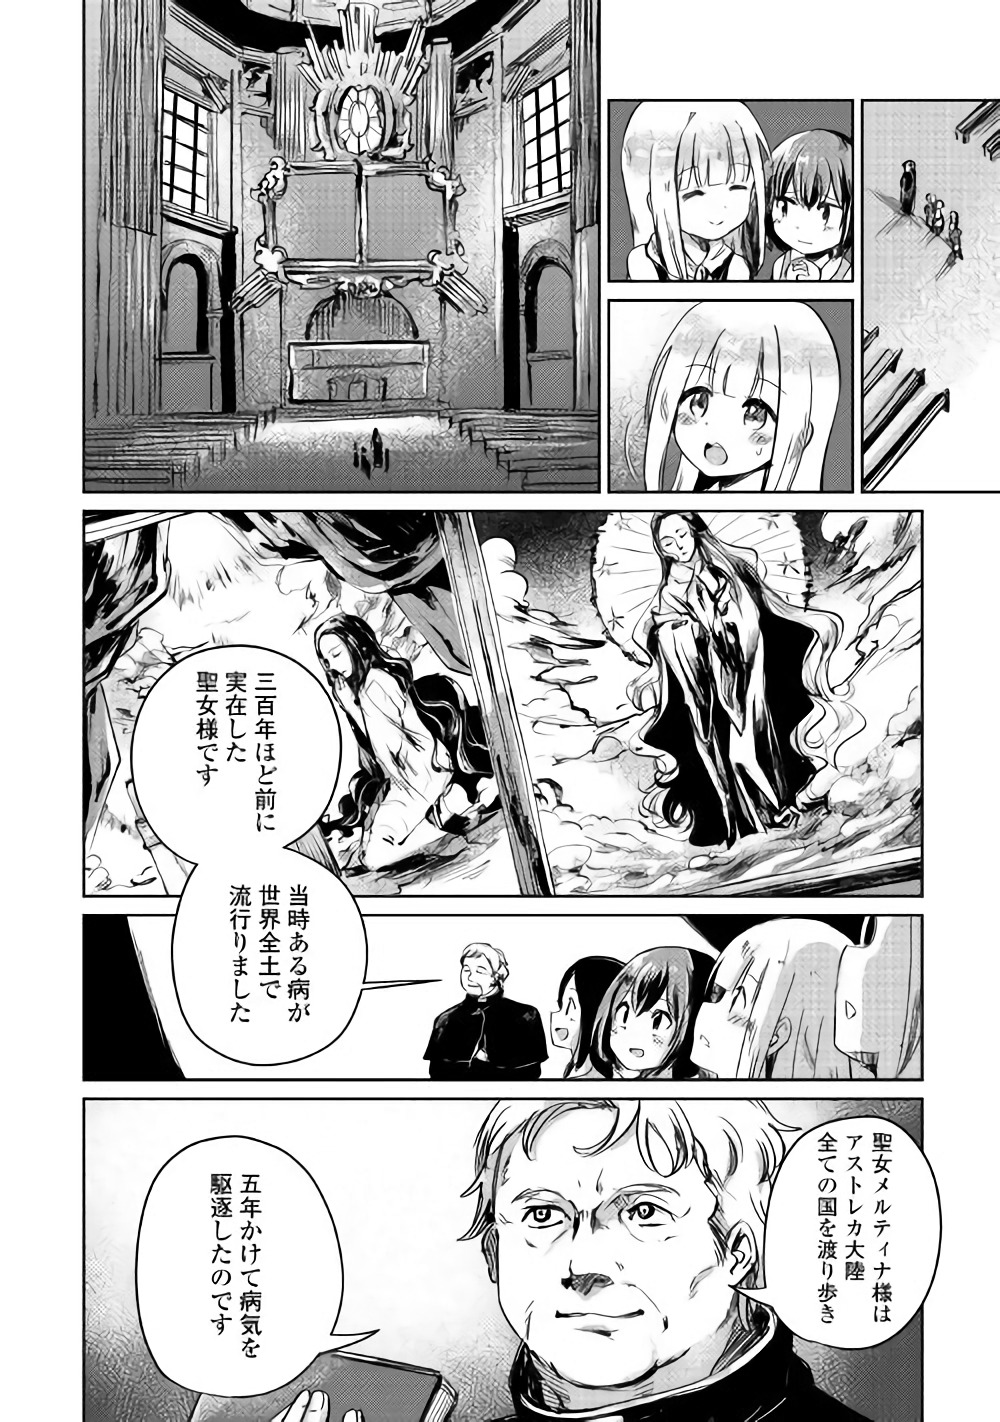 The Former Structural Researcher’s Story of Otherworldly Adventure 第2話 - Page 16